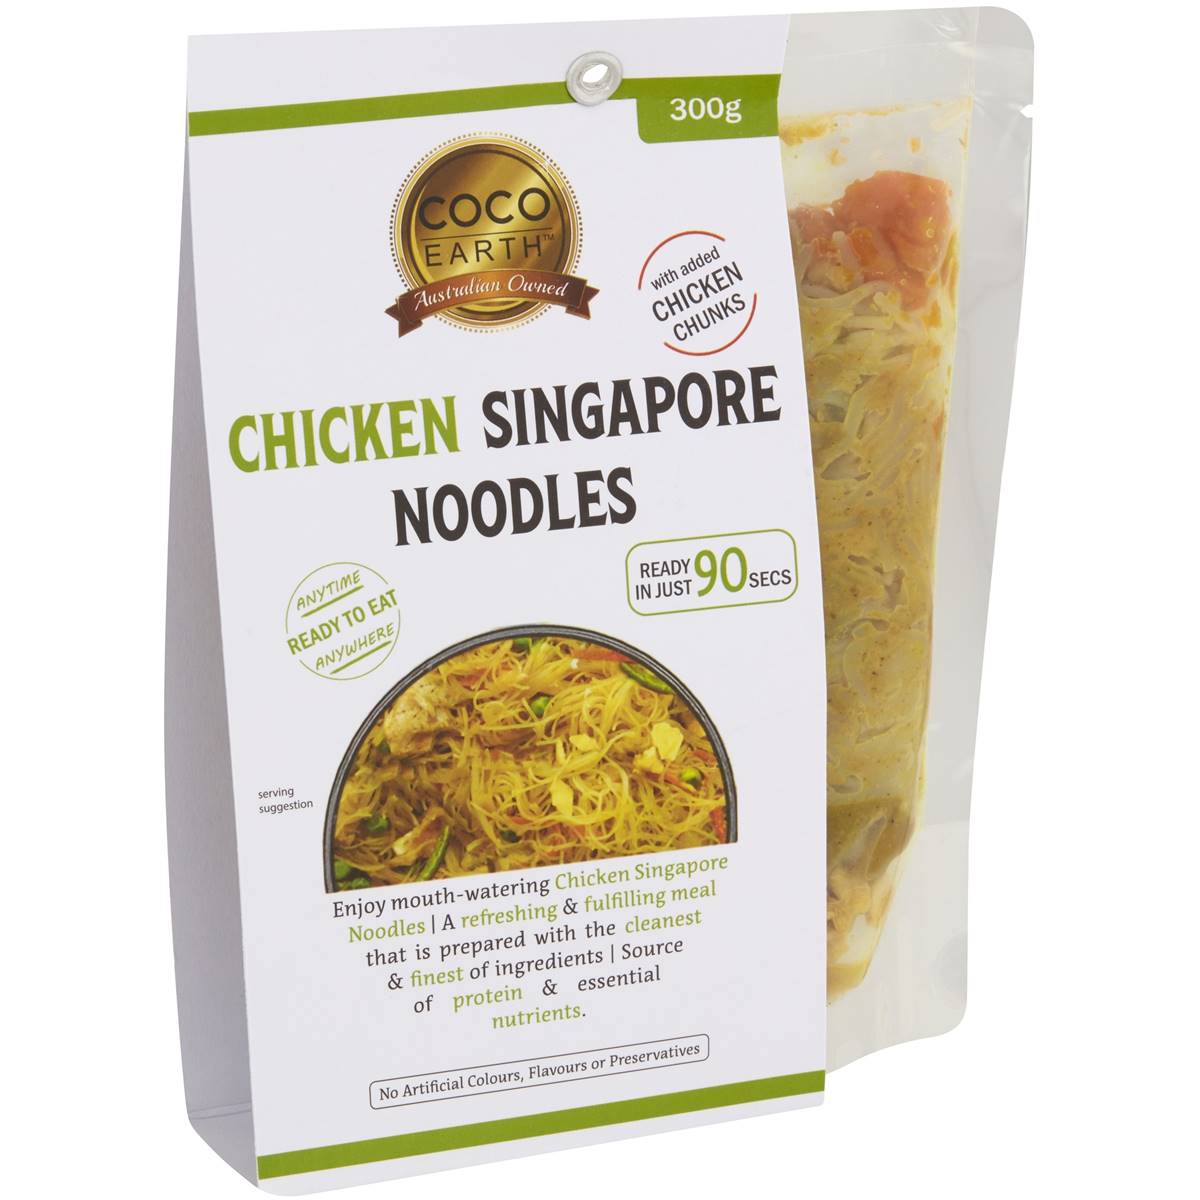 Calories in Coco Earth Chicken Singapore Noodles